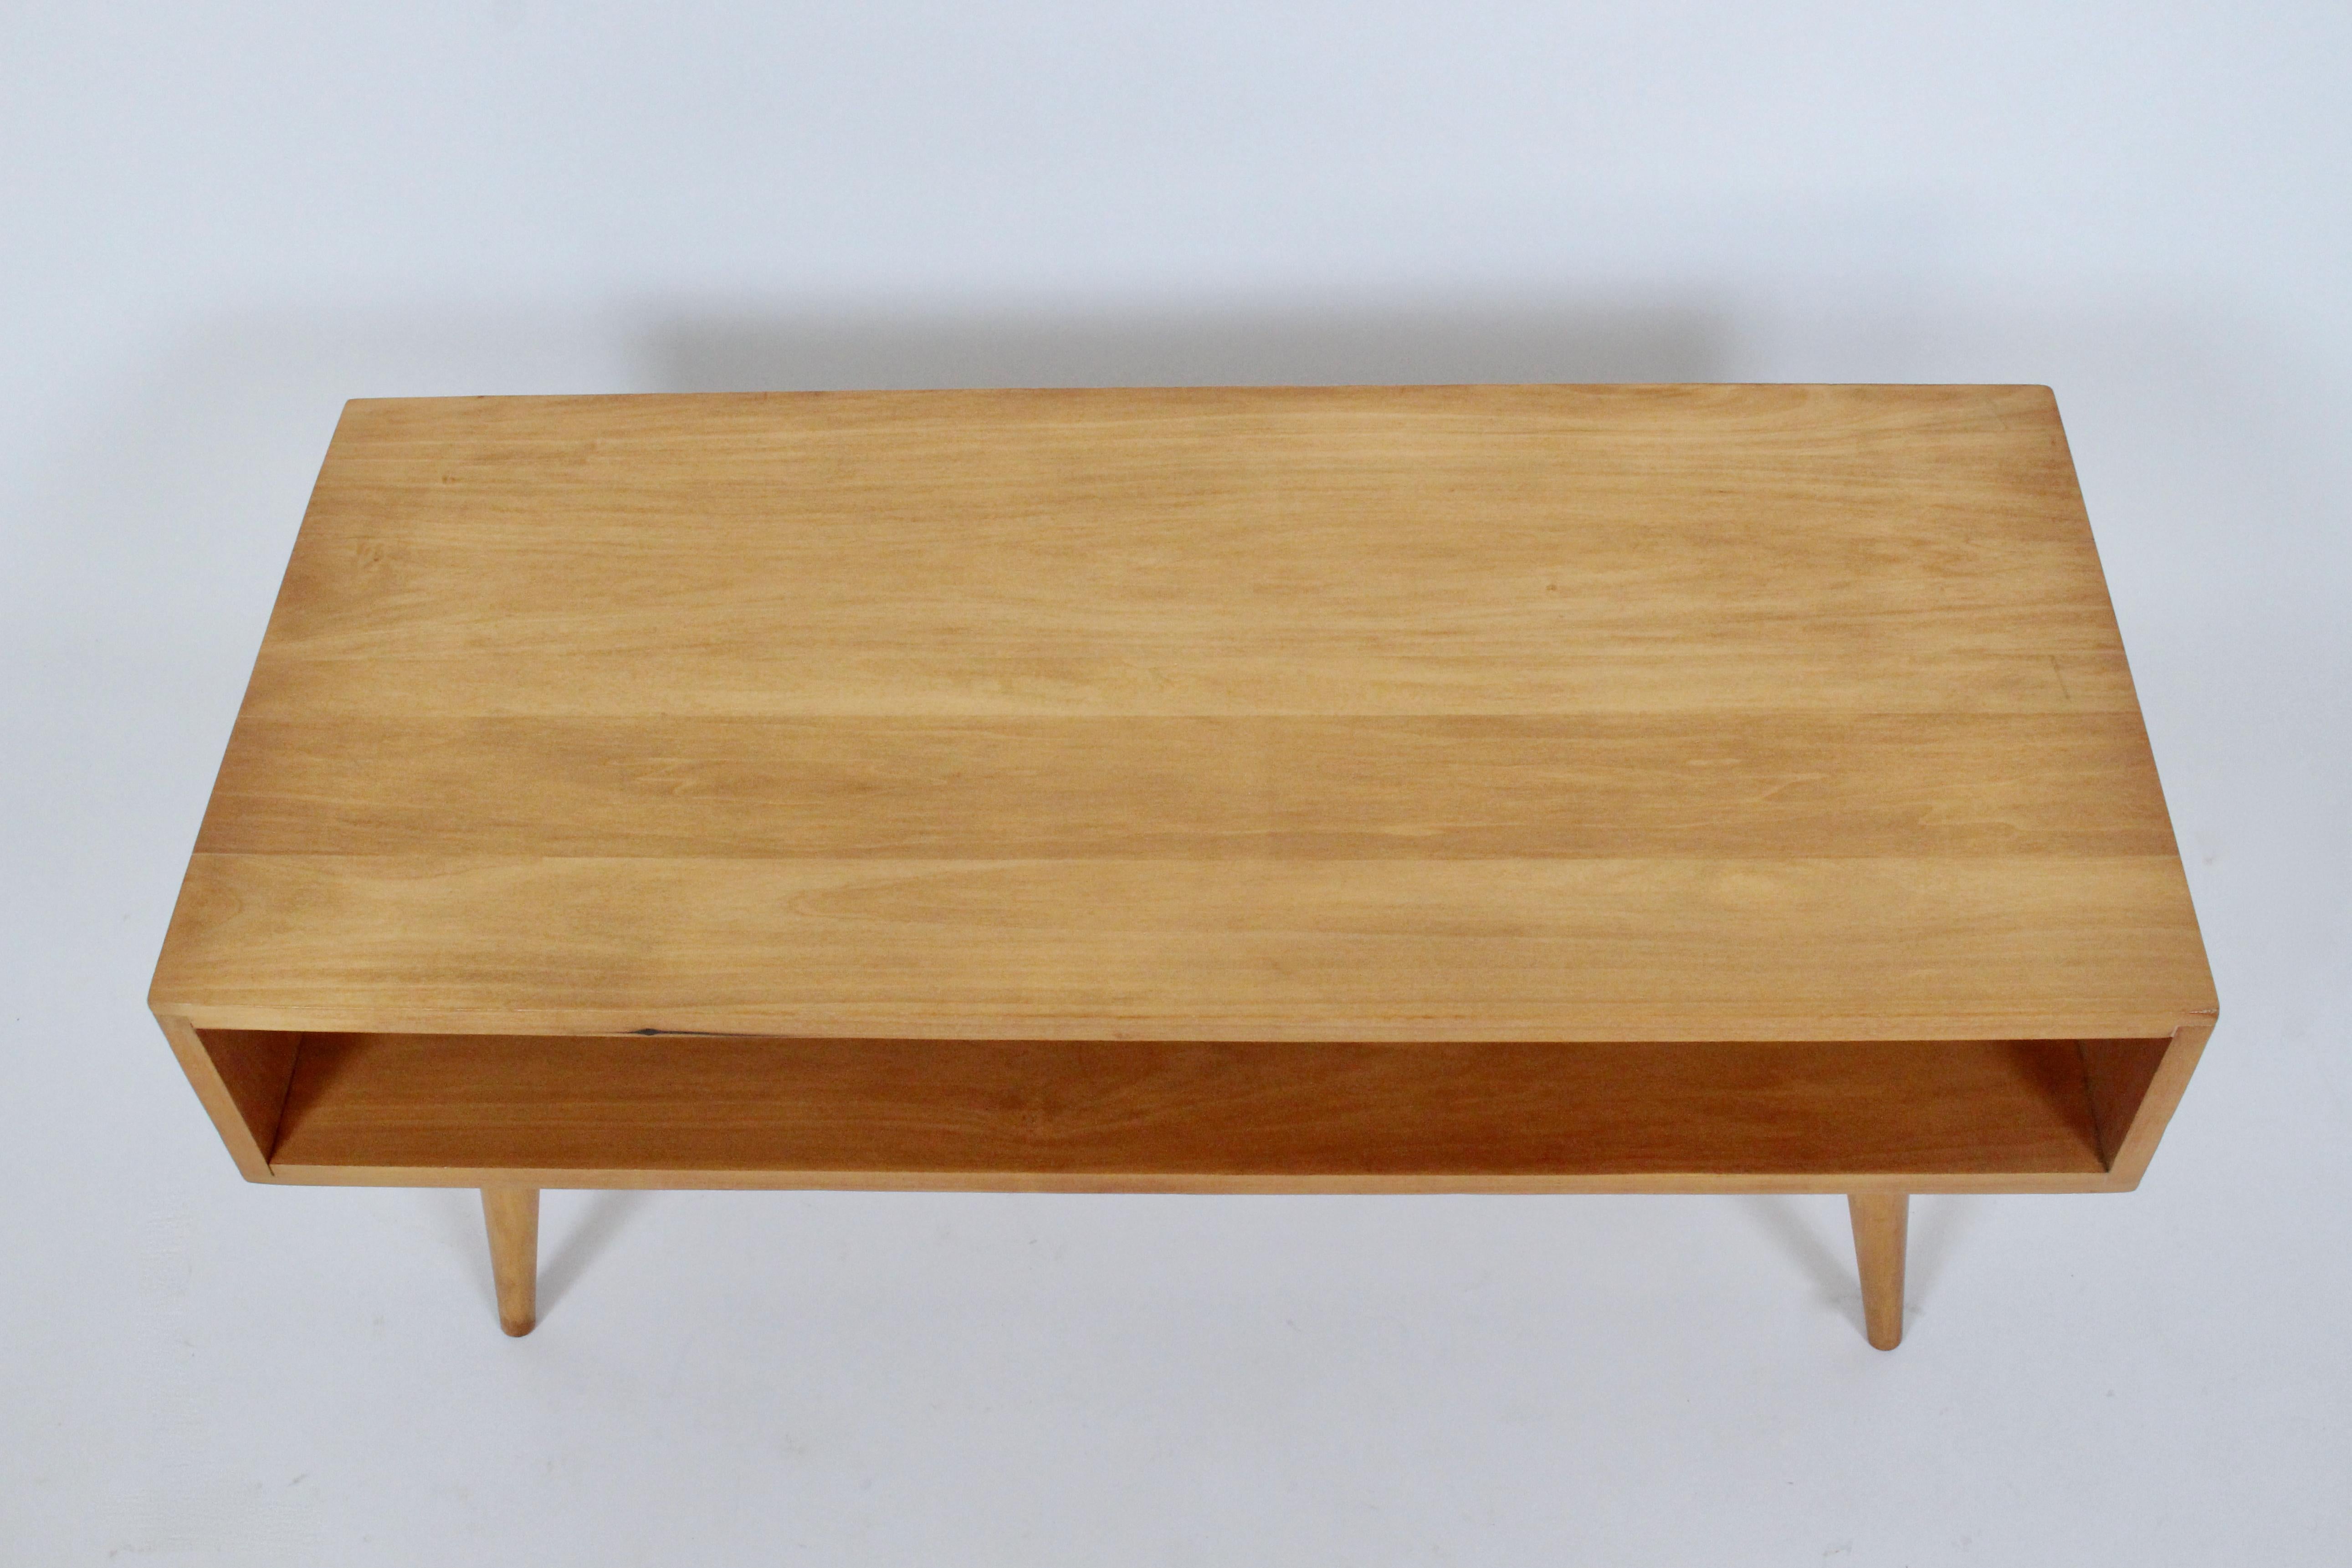 Leslie Diamond for Conant Ball Two Tier Maple Coffee Table, Circa 1960 For Sale 1